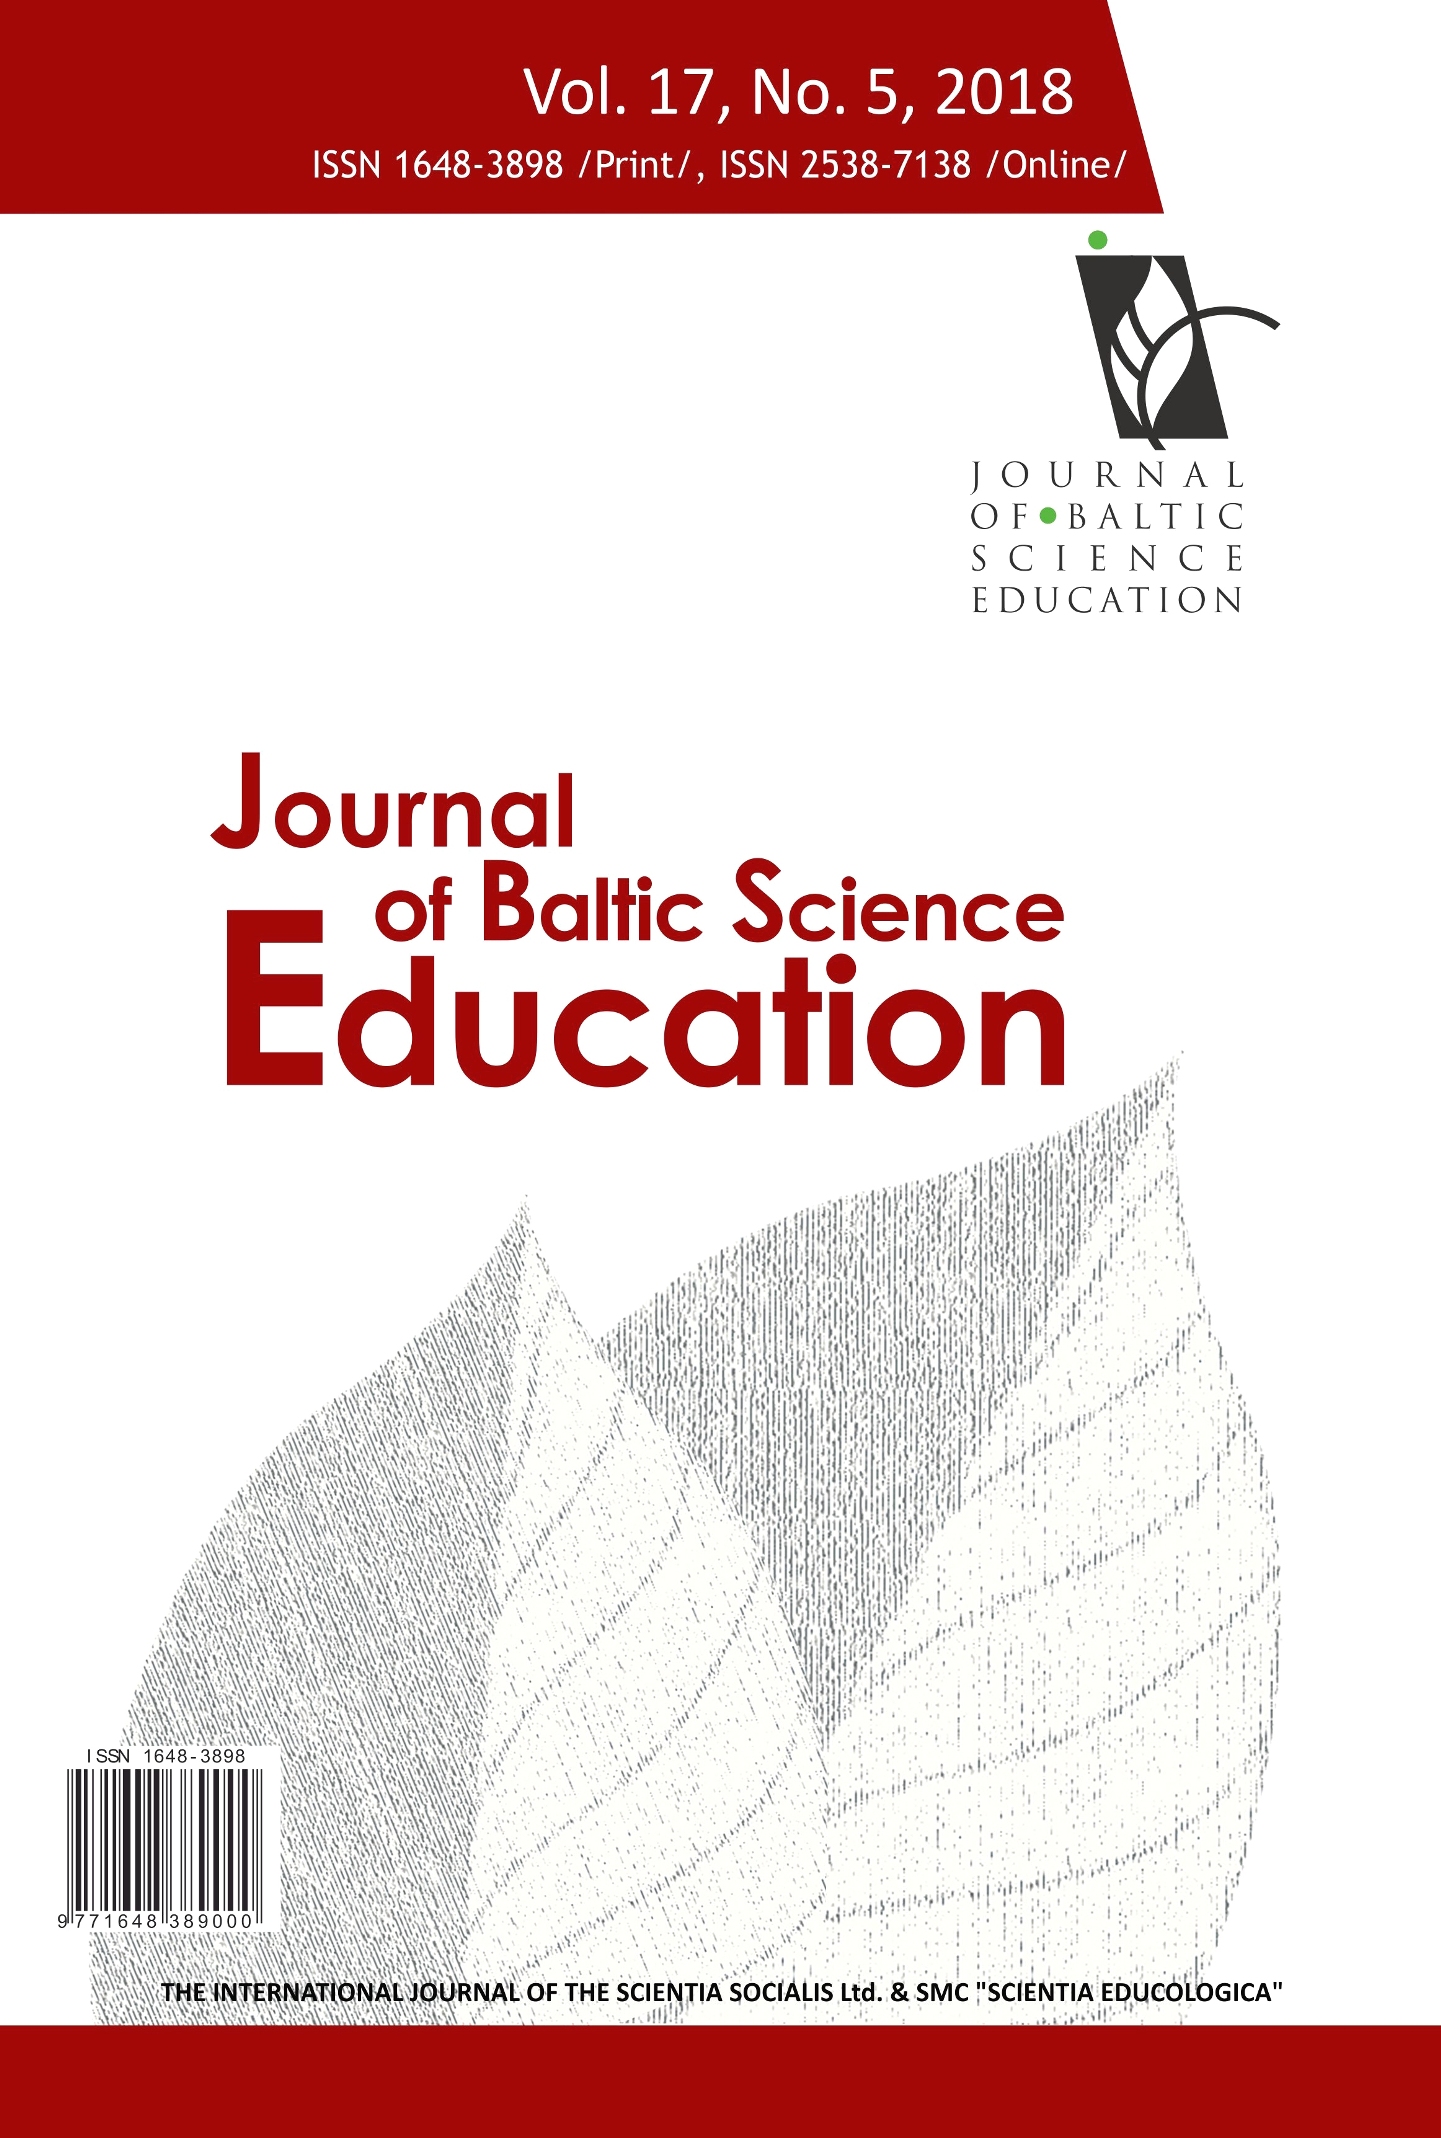 GRADE 12 STUDENTS’ PERCEIVED SELF-EFFICACY TOWARDS WORKING LIFE SKILLS AND CURRICULUM CONTENT PROMOTED THROUGH SCIENCE EDUCATION Cover Image